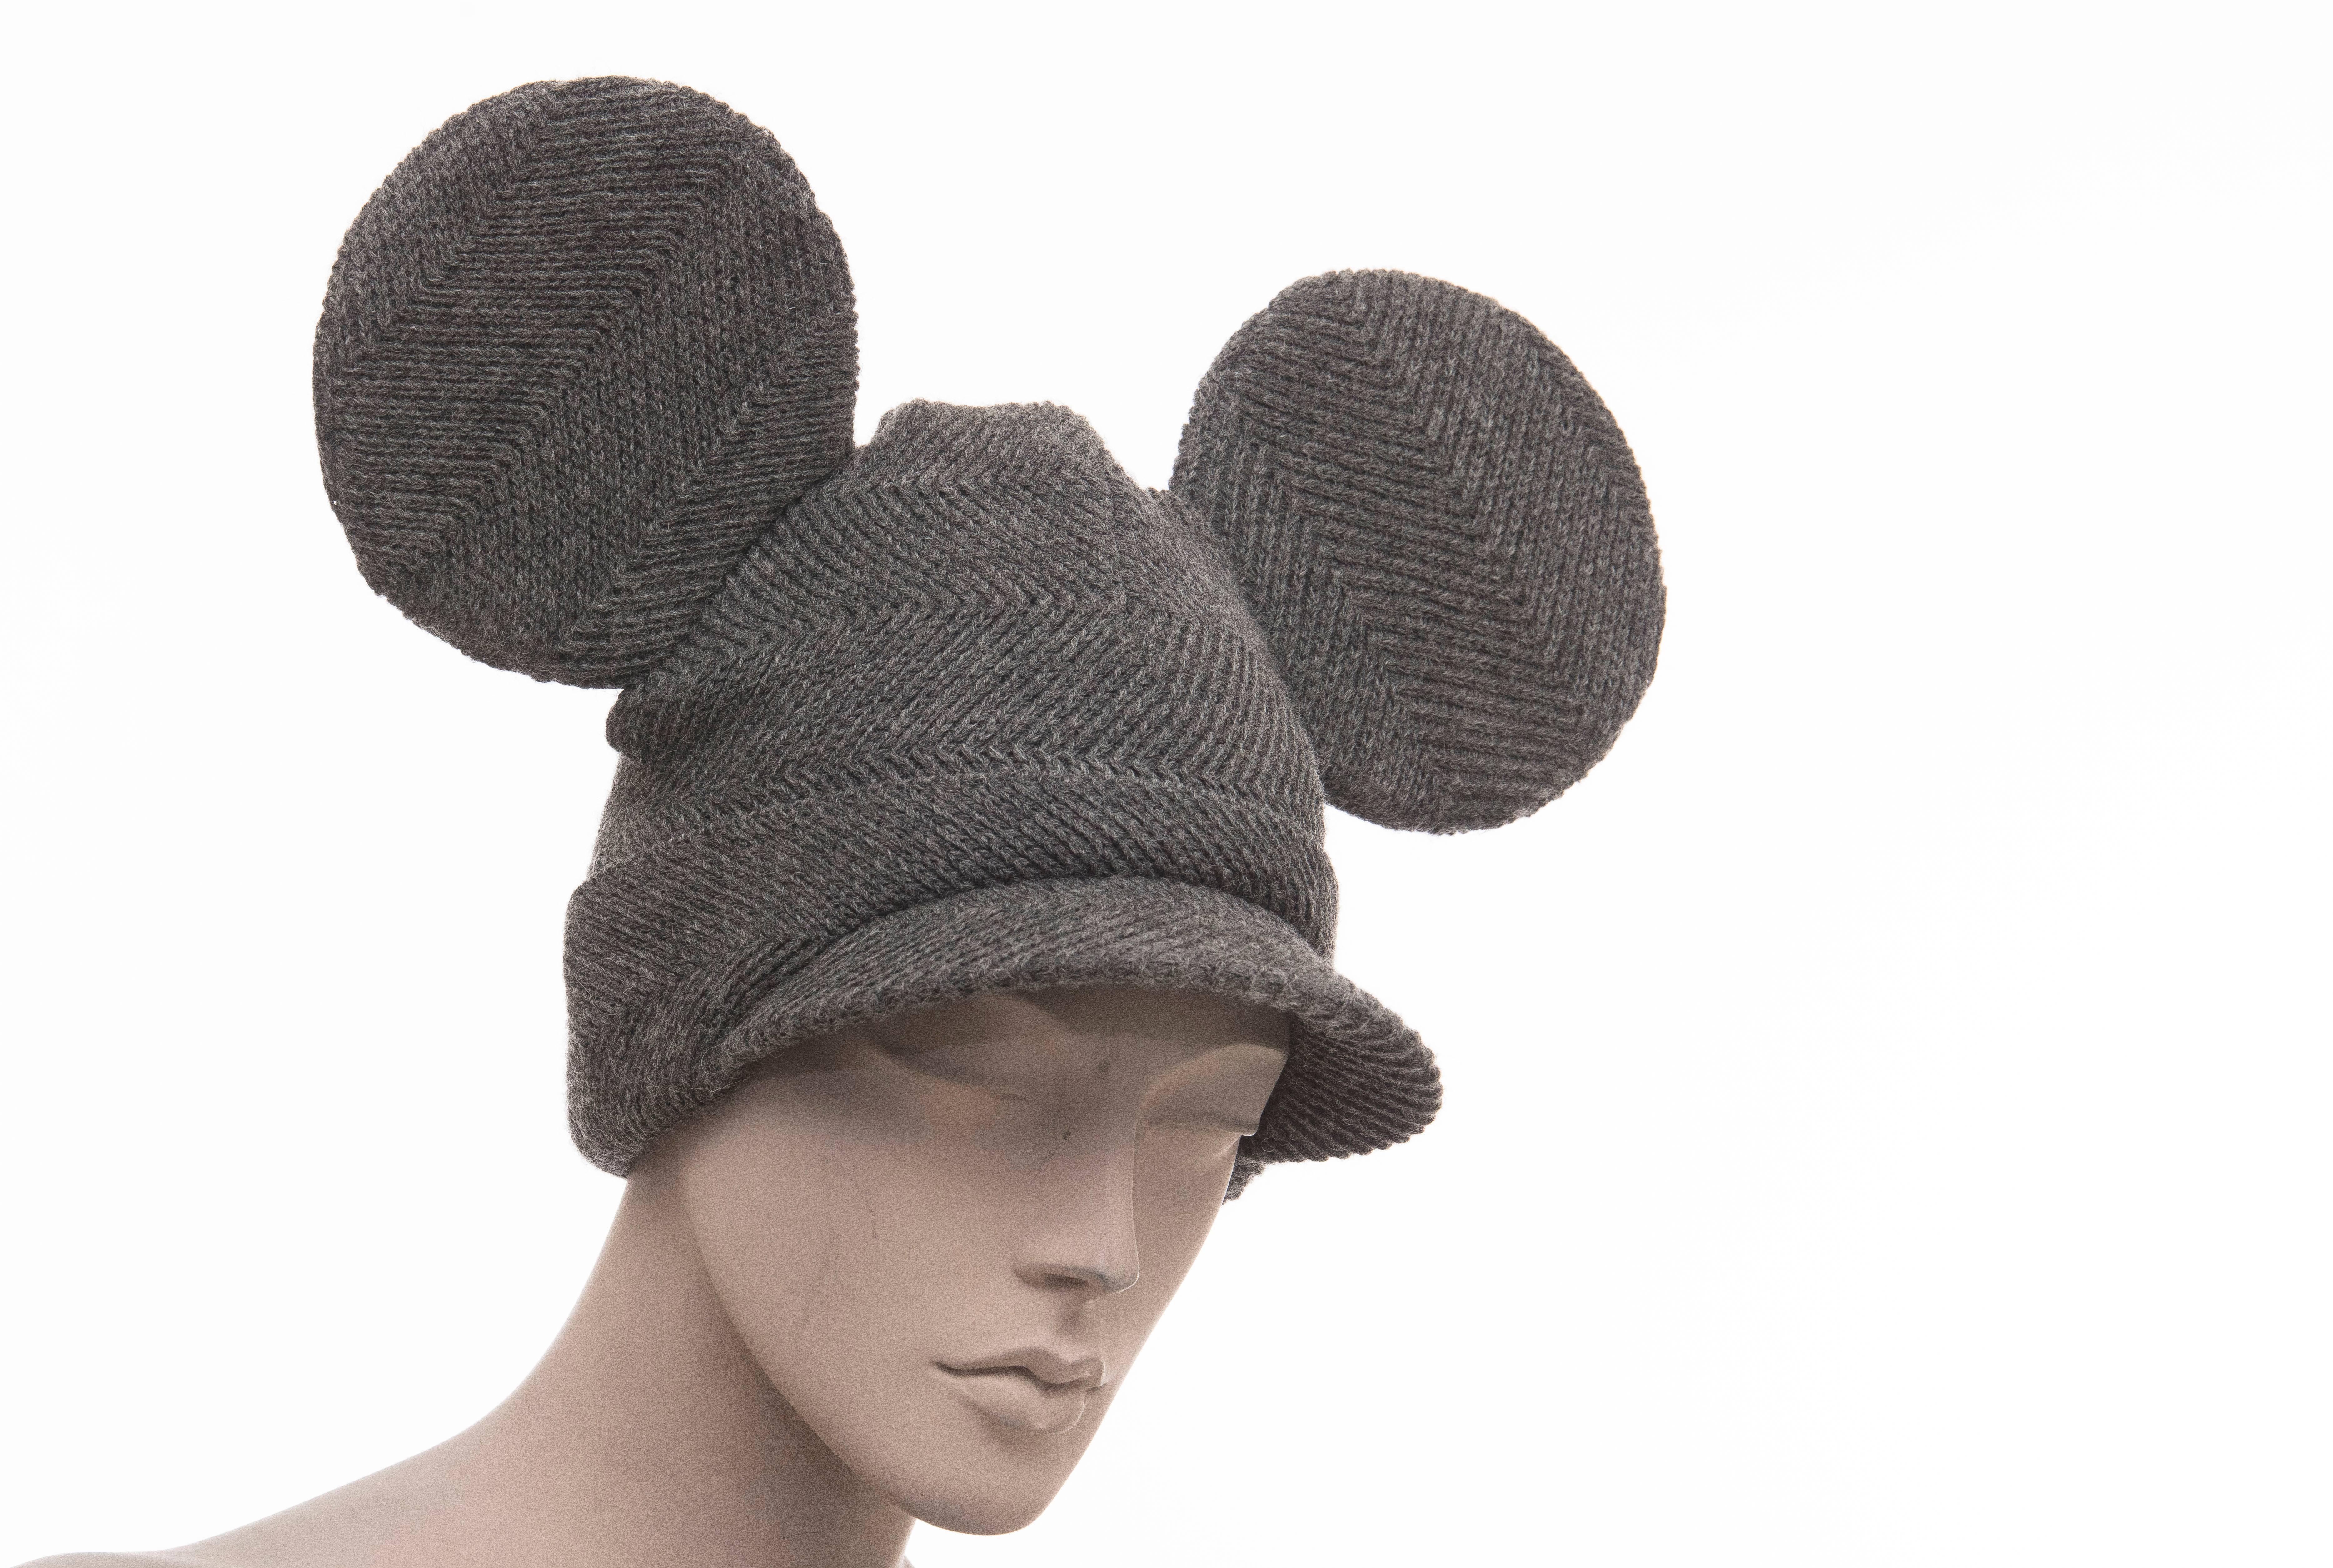 Comme des Garcons Homme Plus by Stephen Jones, Fall 2013 grey wool herringbone knit mouse ears hat.

No Size Label

Circumference: 14, Brim 2

